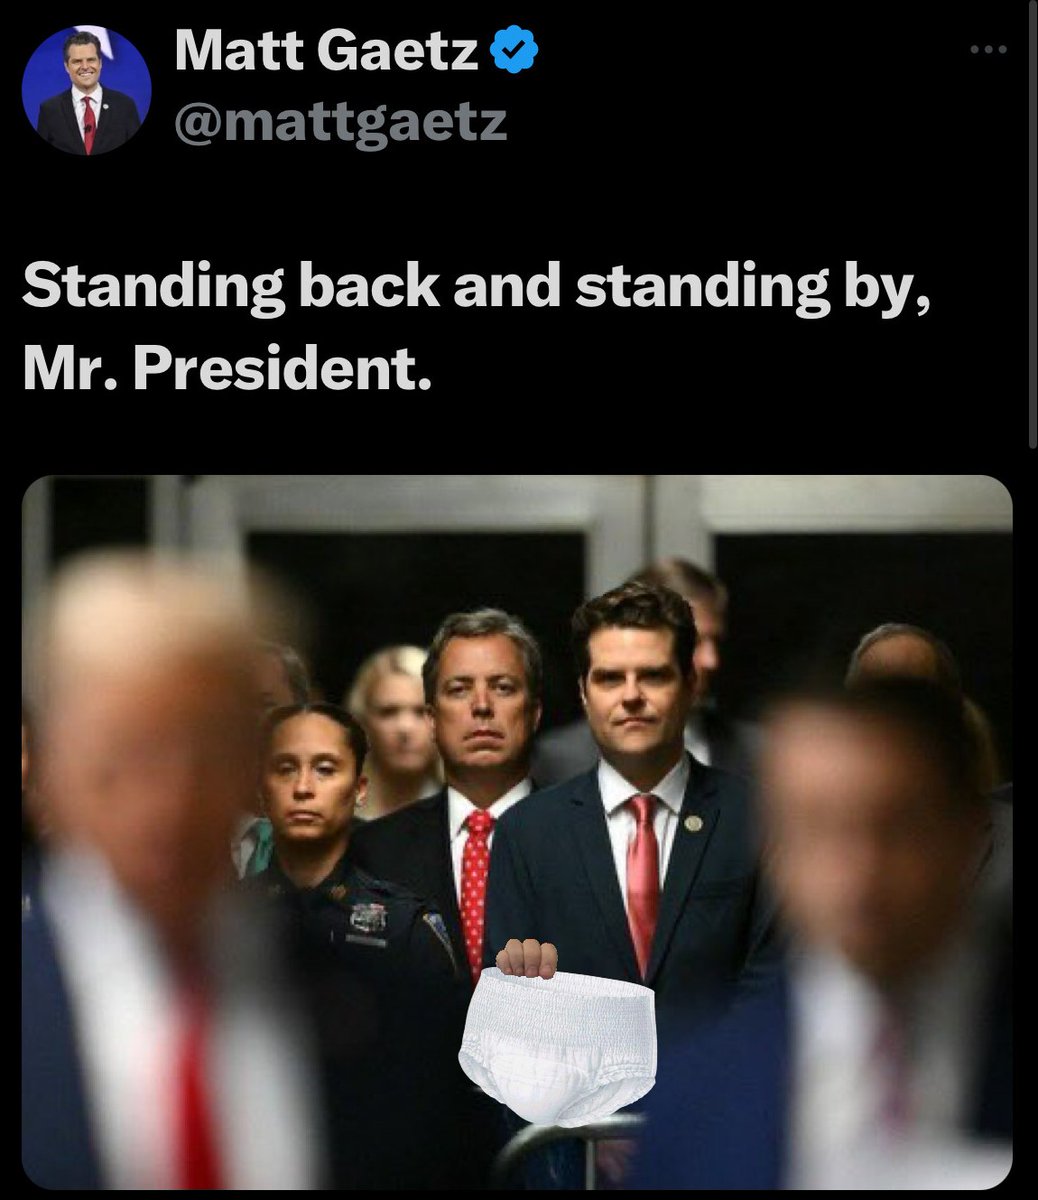 Matt Gaetz is bravely standing by for anything that our beloved President Trump needs in court today. #DiaperStrong